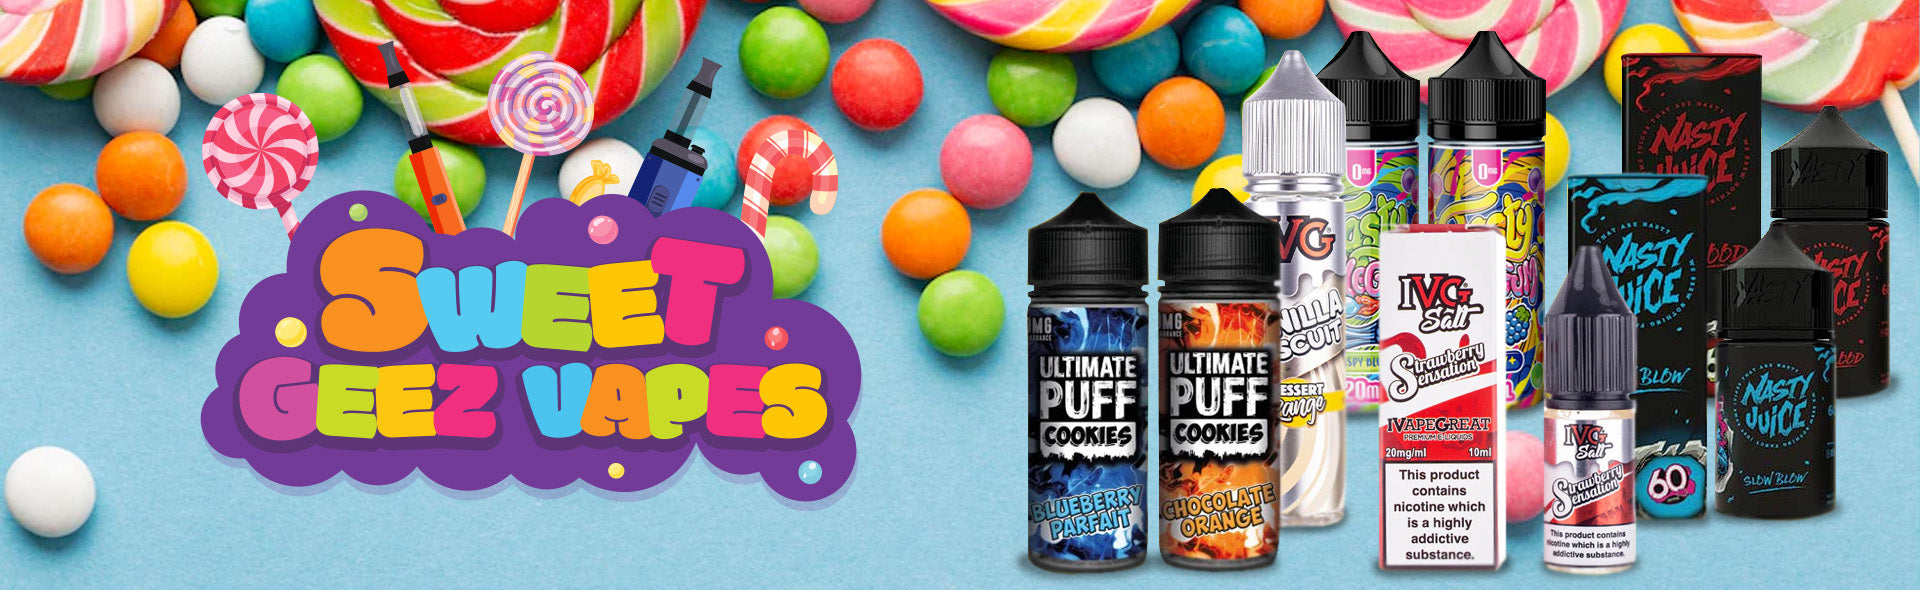 Sweet Geez Vapes collection of E-liquids available to buy